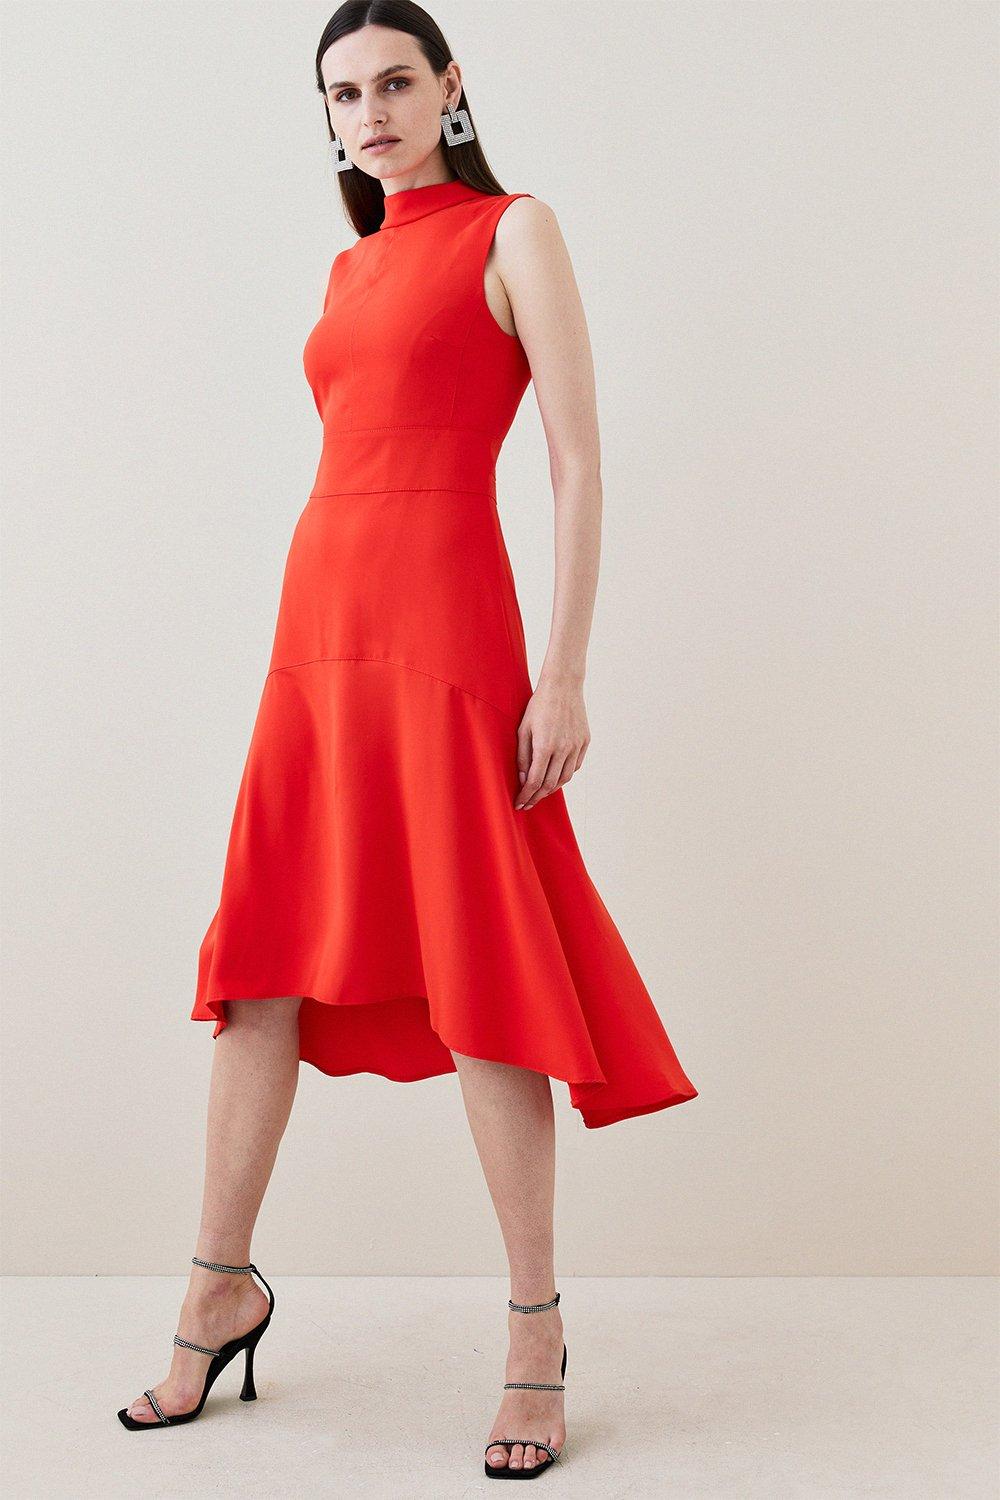 Summer Party Dresses from Karen Millen - Style Charade